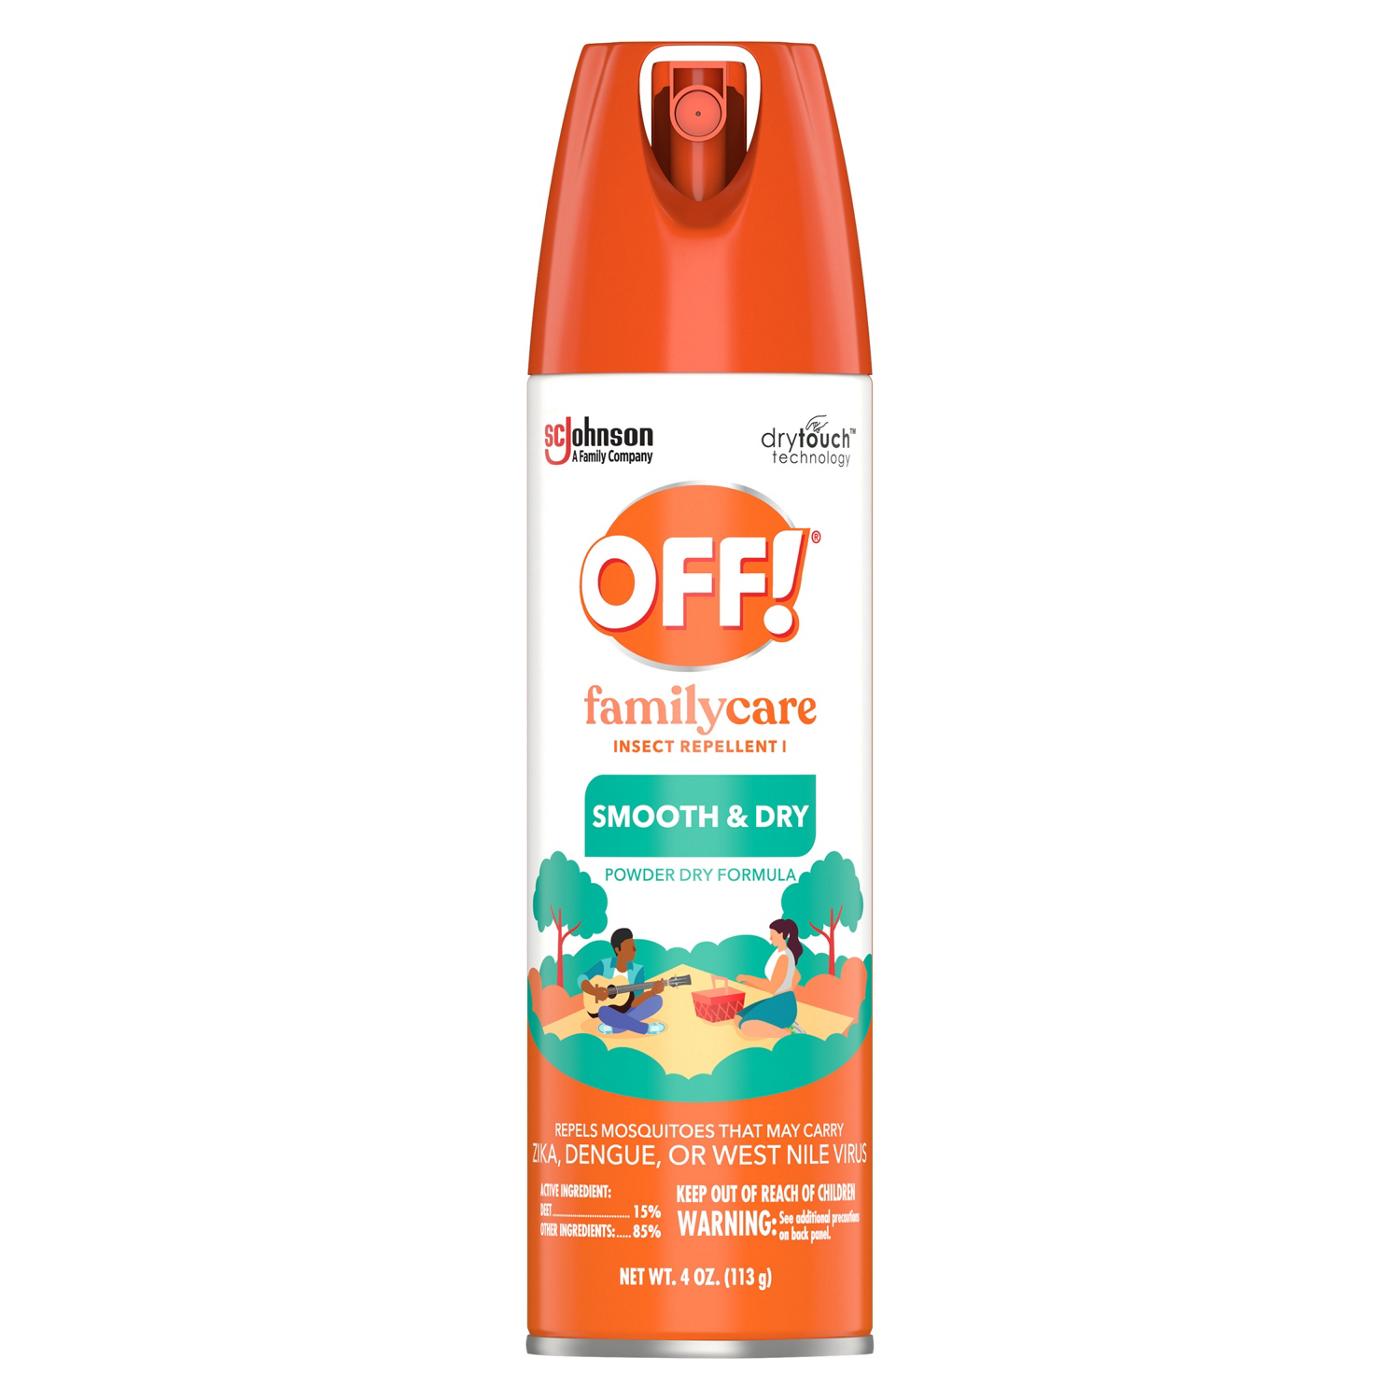 Off! FamilyCare Smooth & Dry Insect Repellent I; image 1 of 2